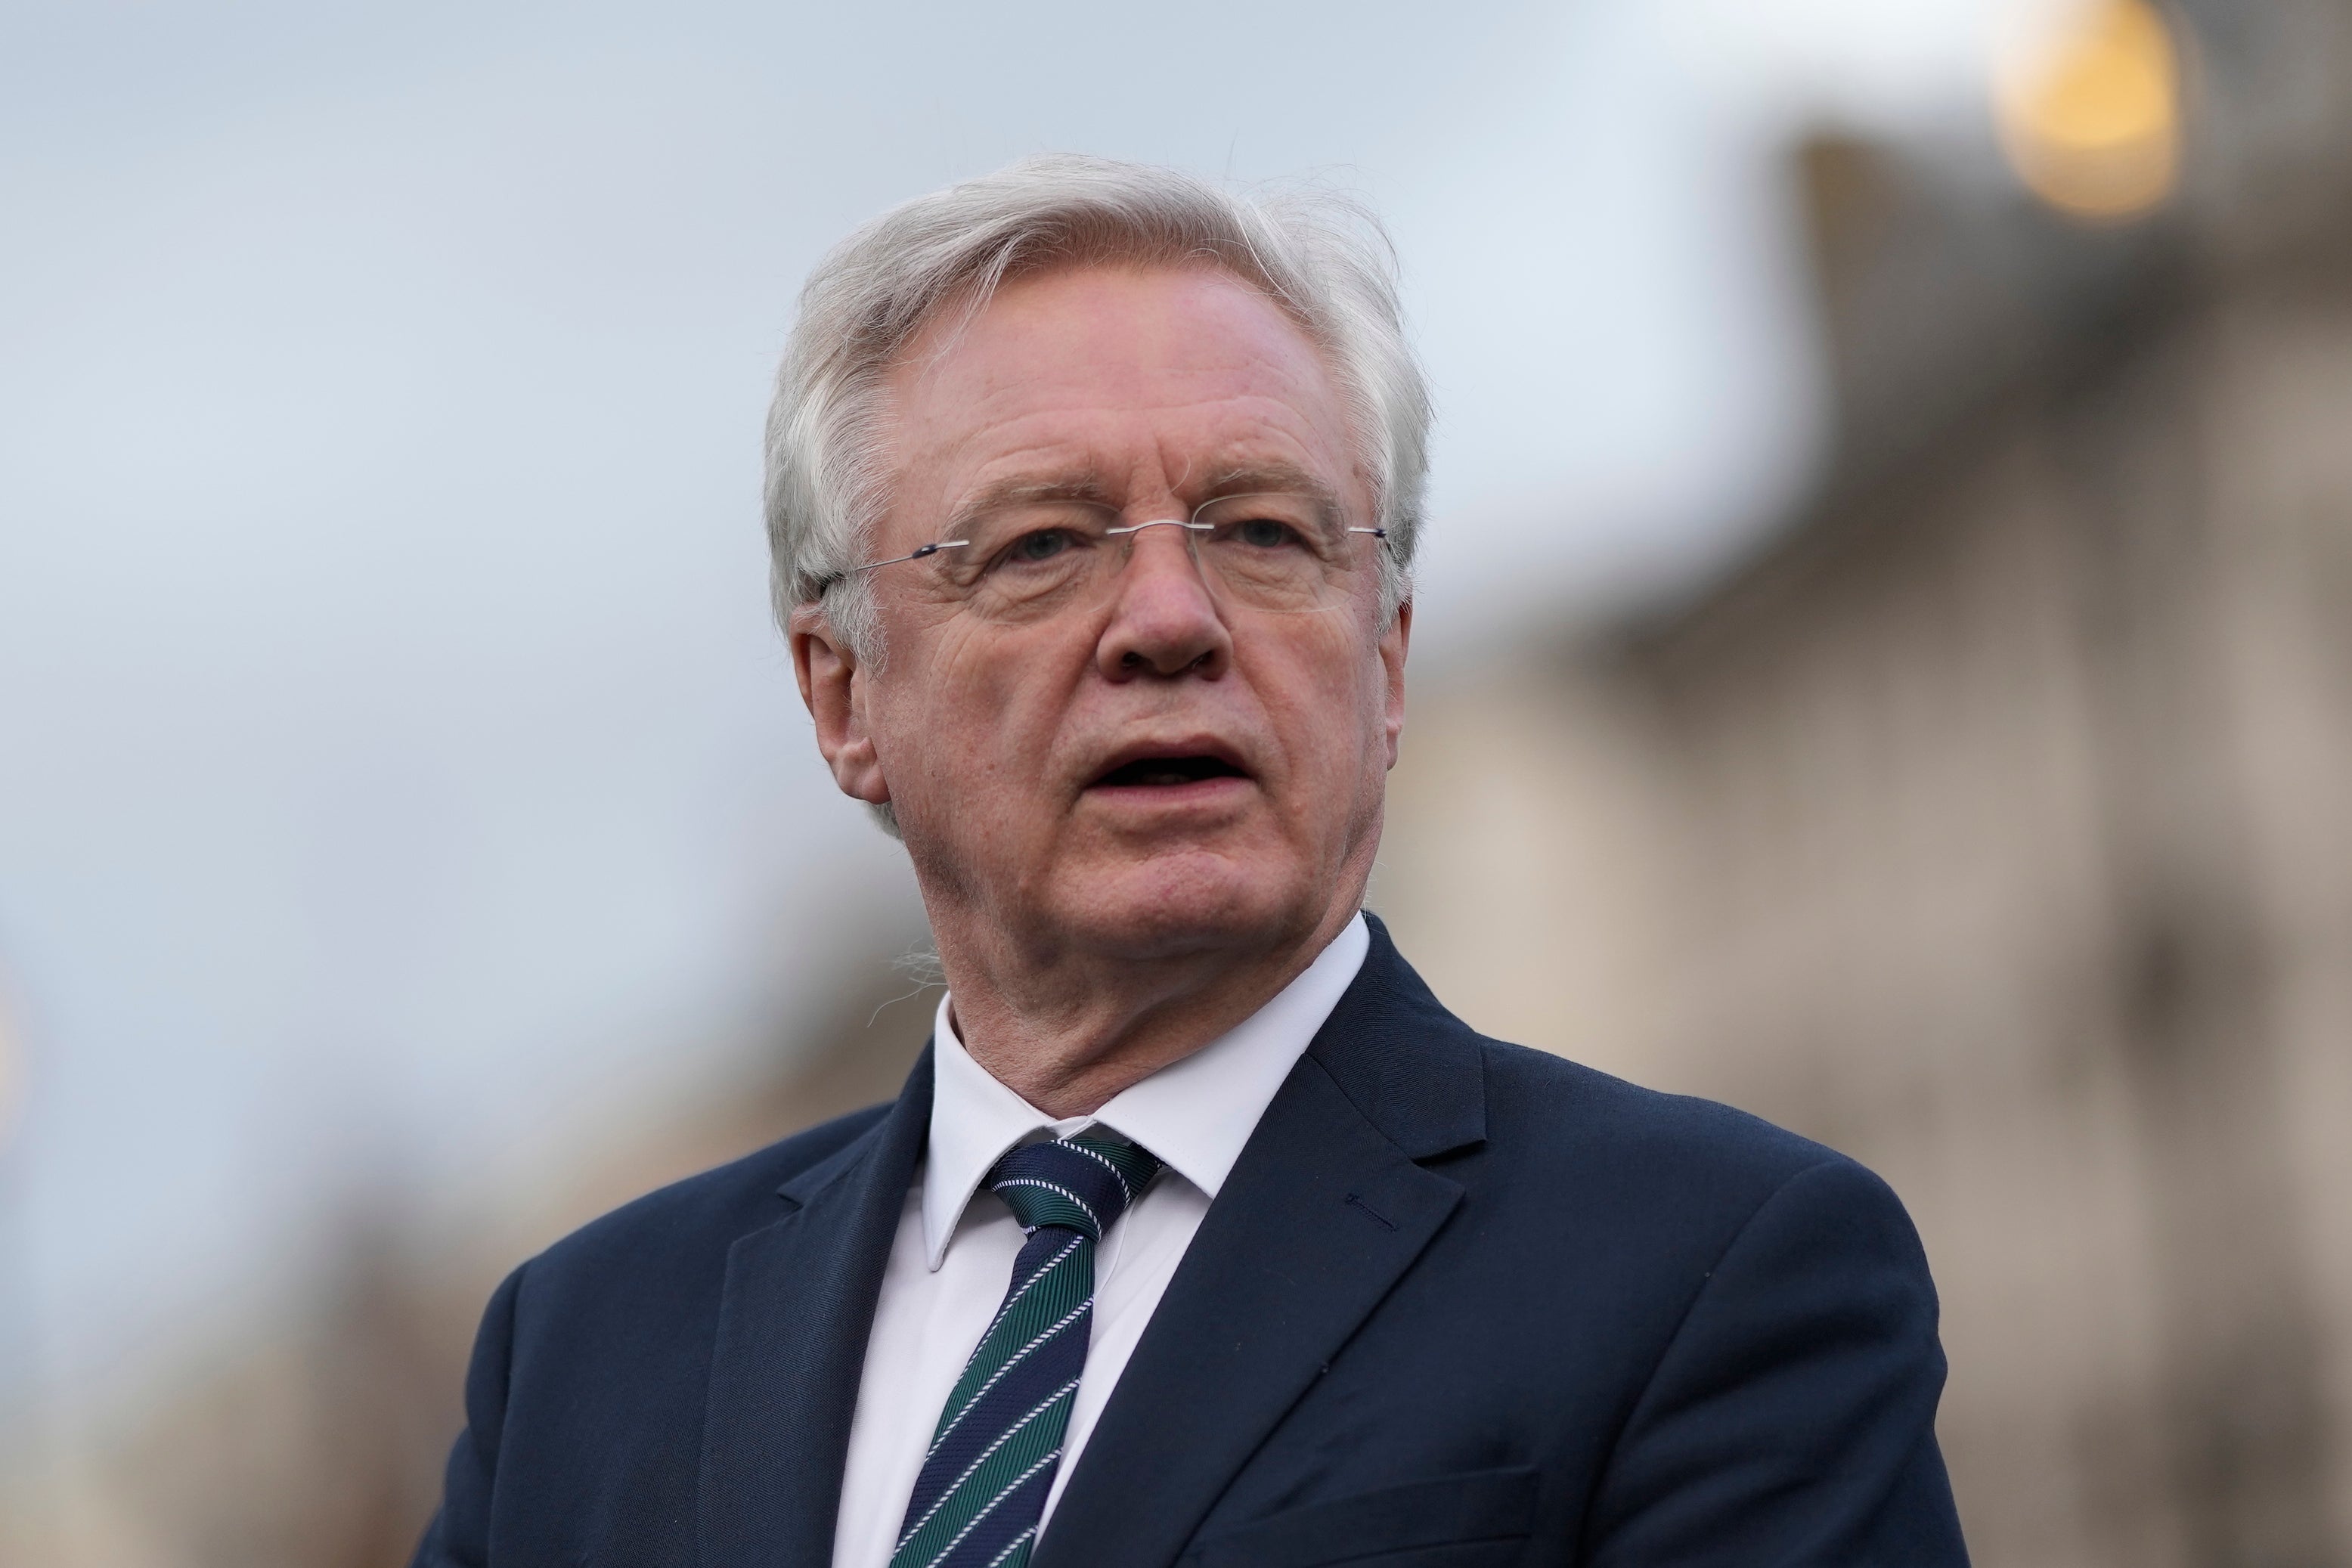 Former Brexit minister David Davis is among signatories of a letter to the prime minister warning that the borders bill is ‘dangerous’ and will ‘significantly breach key international obligations’